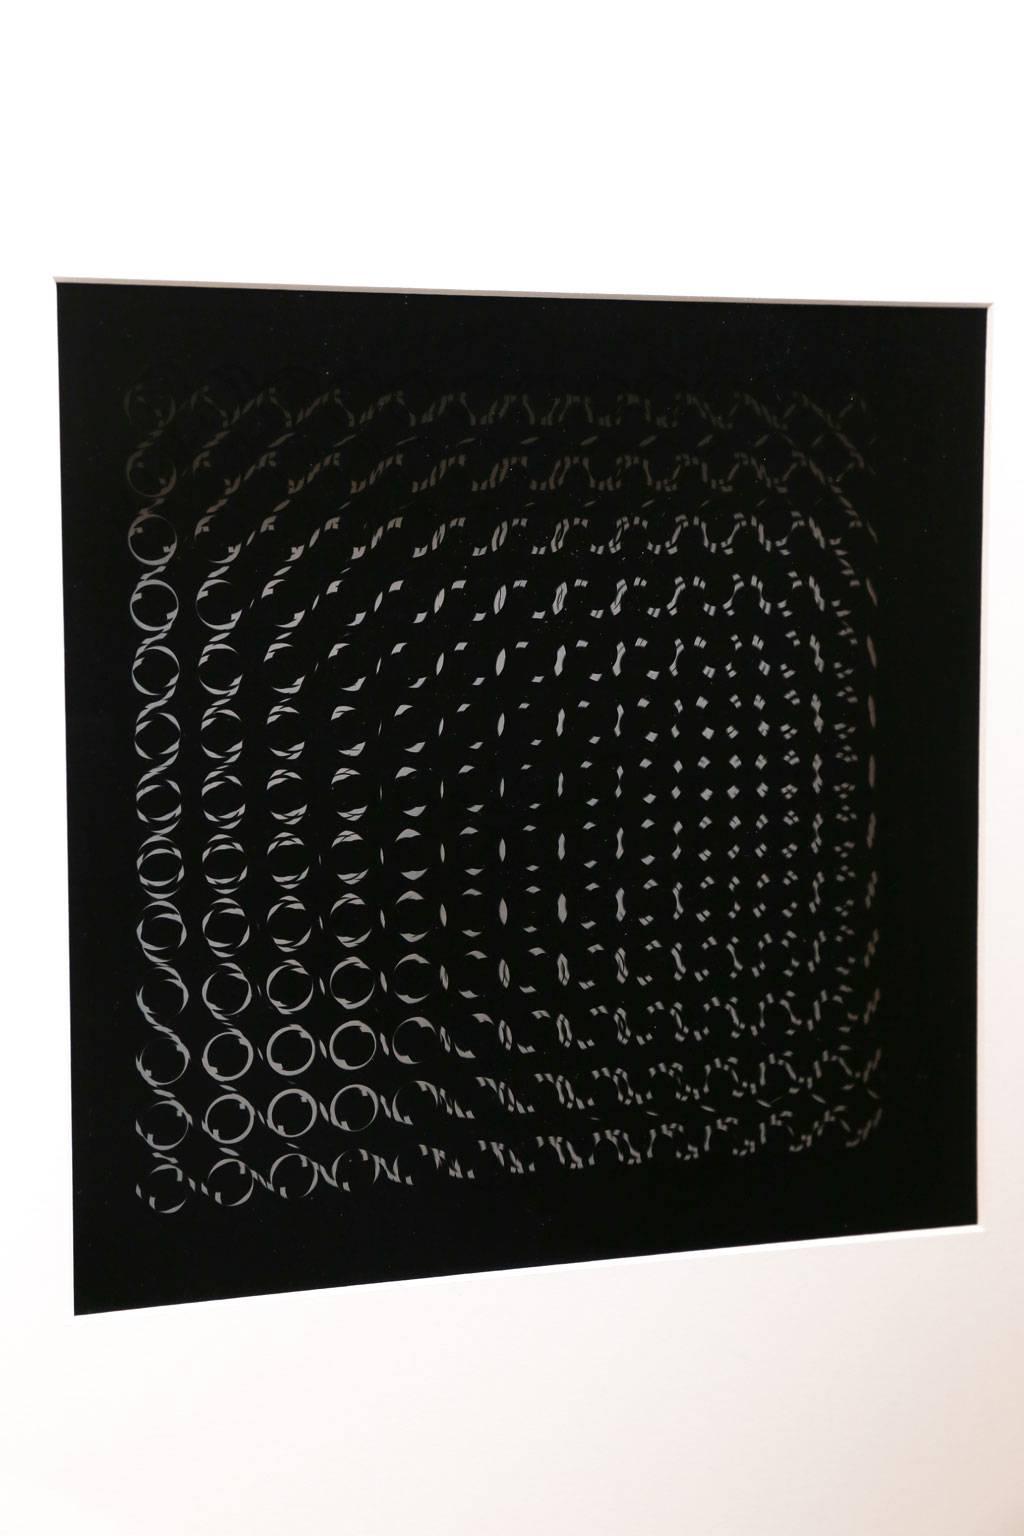 Painted Original Victor Vasarely Oeuvres Profondes Framed 3D Op Art Print